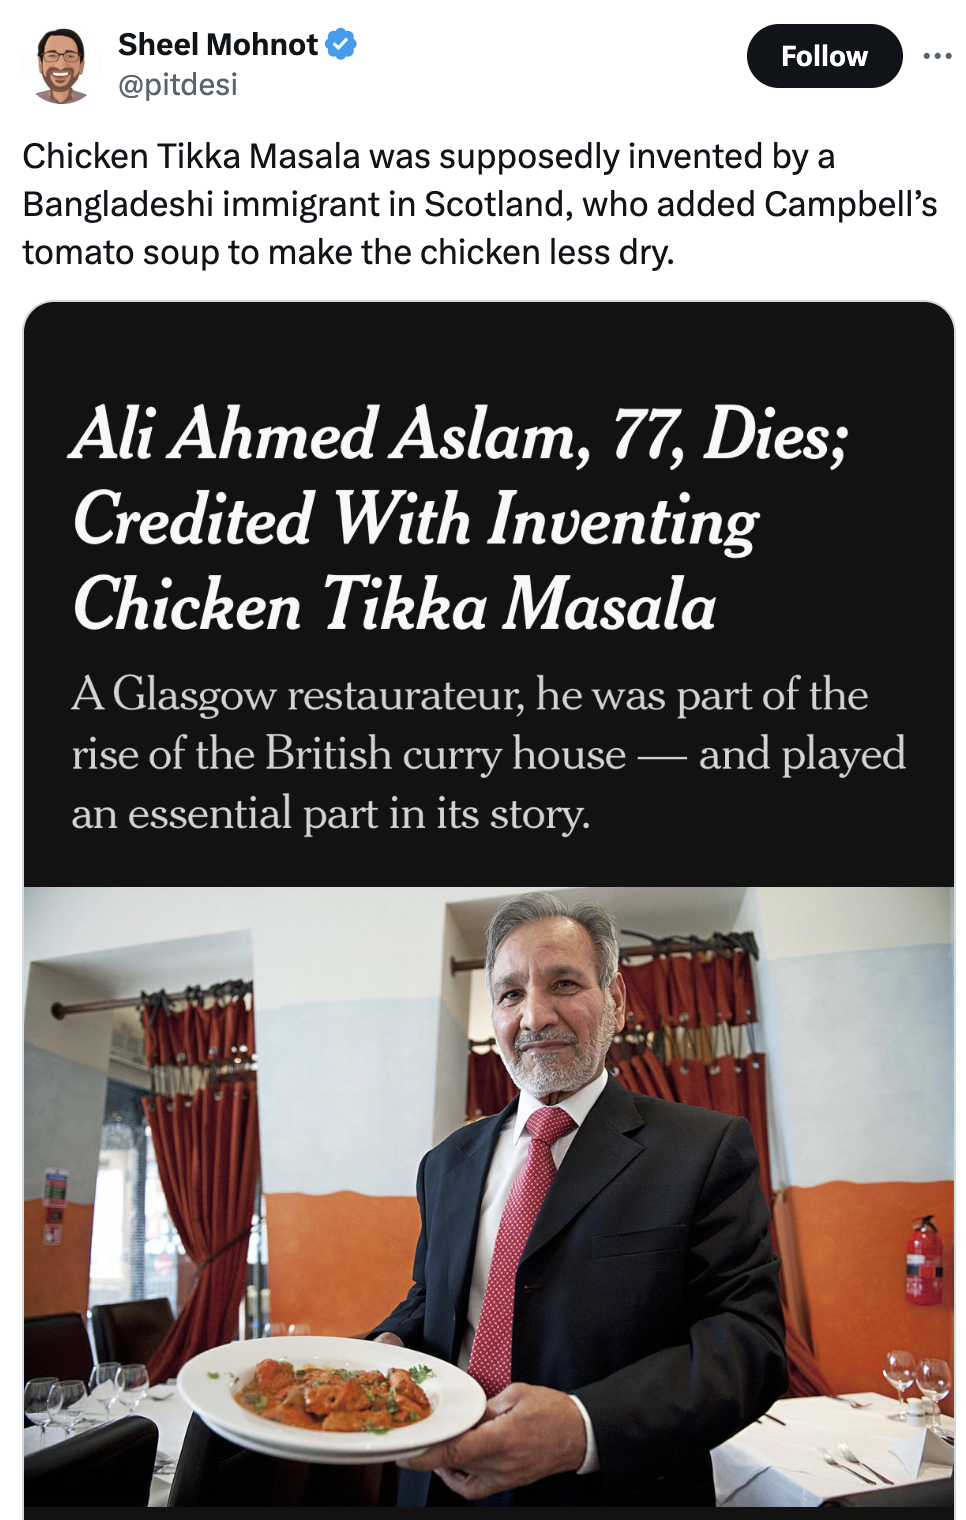 inventor of chicken tikka masala - Sheel Mohnot Chicken Tikka Masala was supposedly invented by a Bangladeshi immigrant in Scotland, who added Campbell's tomato soup to make the chicken less dry. Ali Ahmed Aslam, 77, Dies; Credited With Inventing Chicken